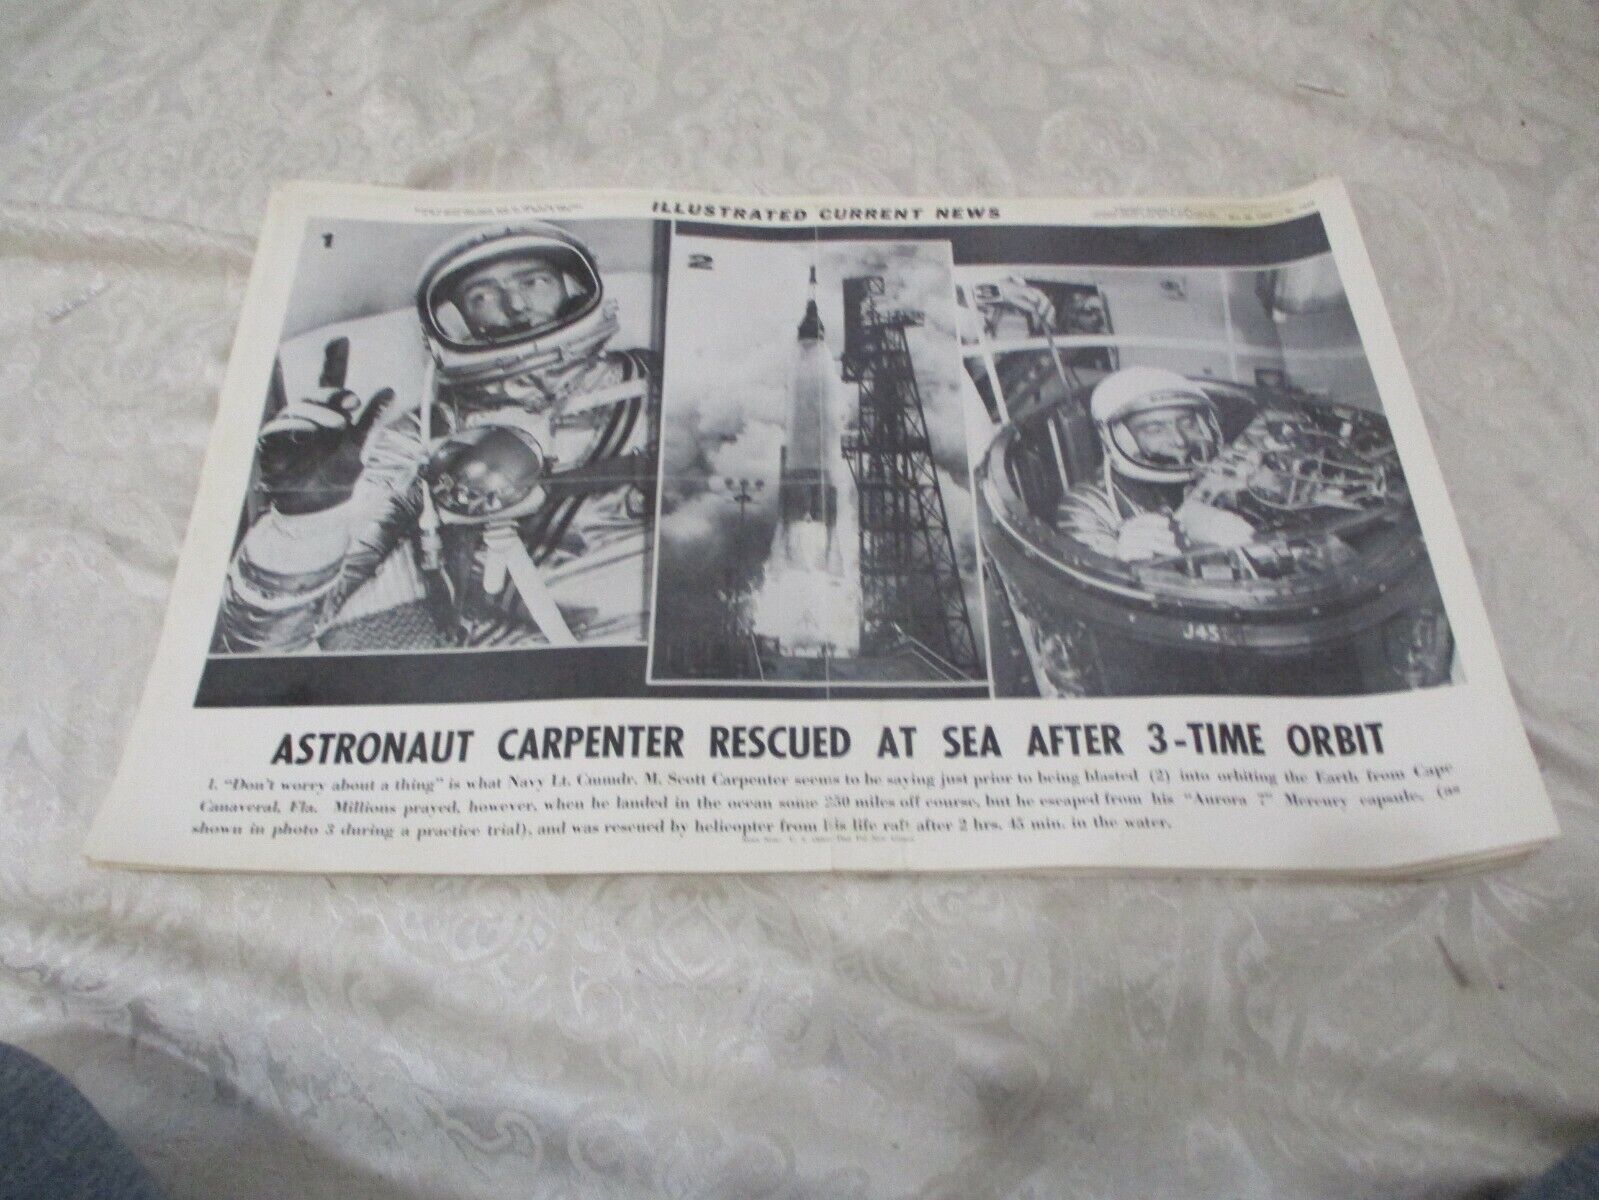 ILLUSTRATED CURRENT NEWS MAY 28 1962 ASTRONAUT CARPENTER RESCUED AT SEA AFTER 3 